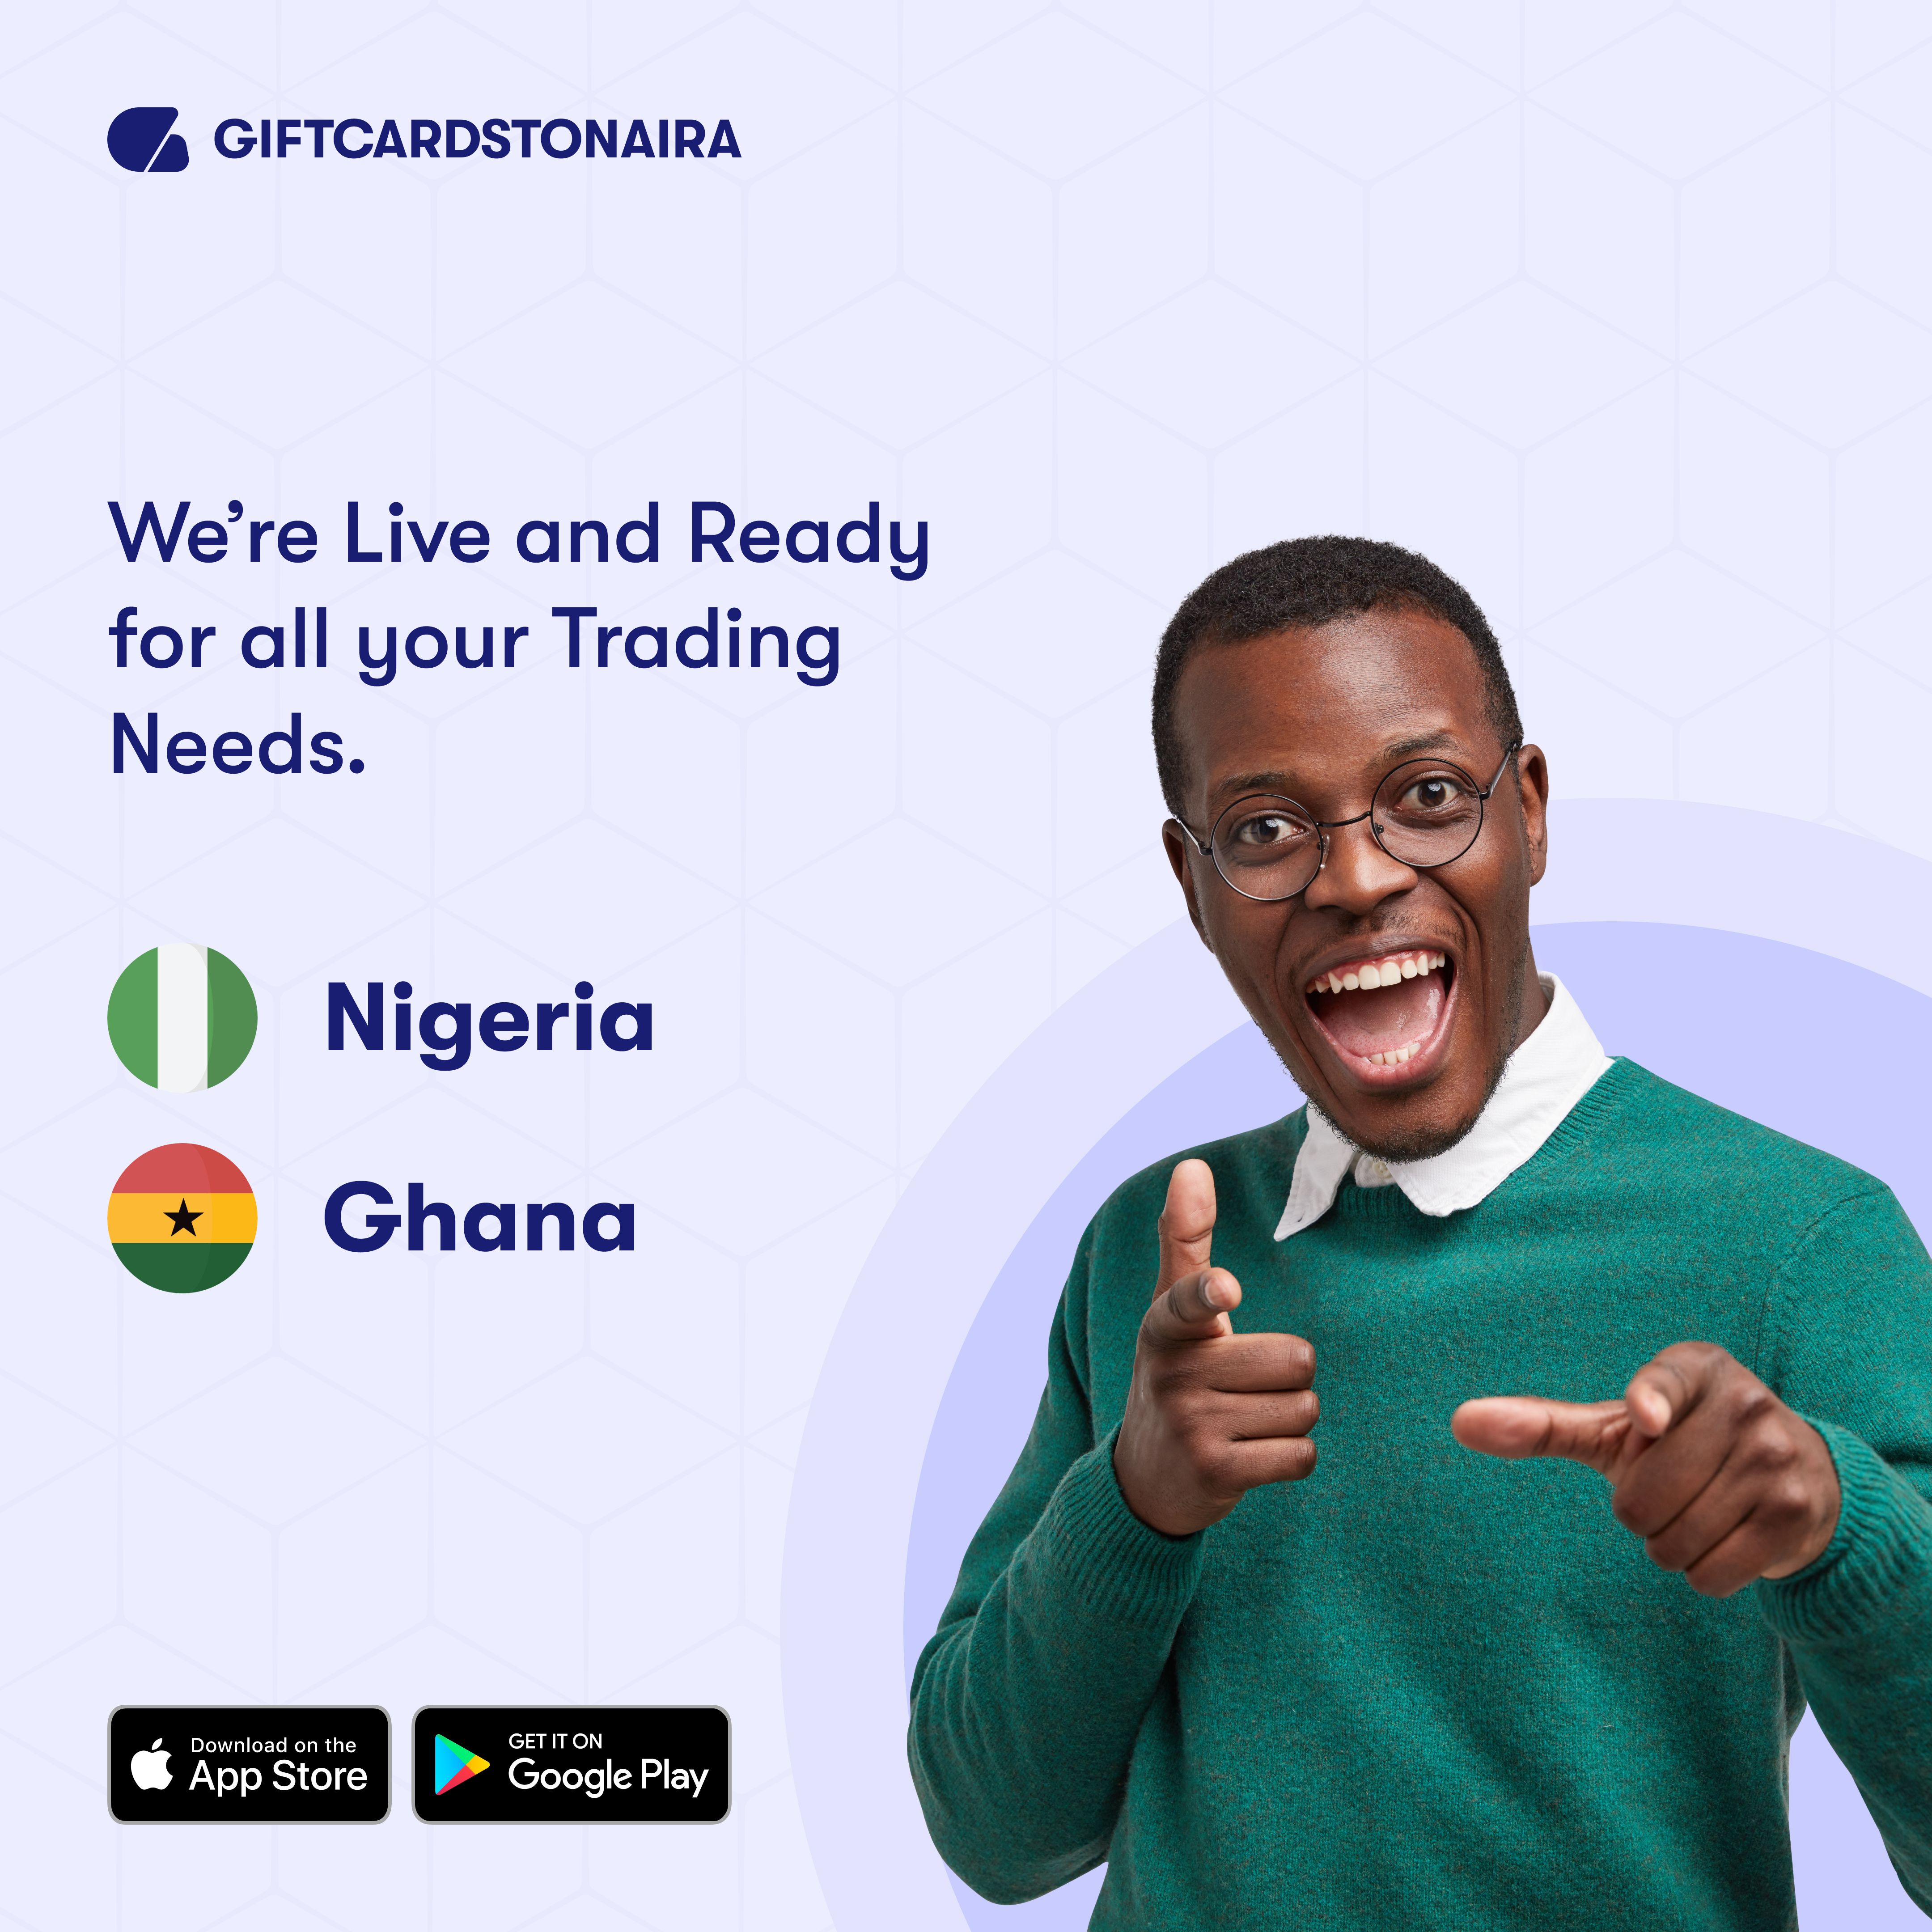 Giftcardstonaira Launches A Gift Card Trading App For West African Customers